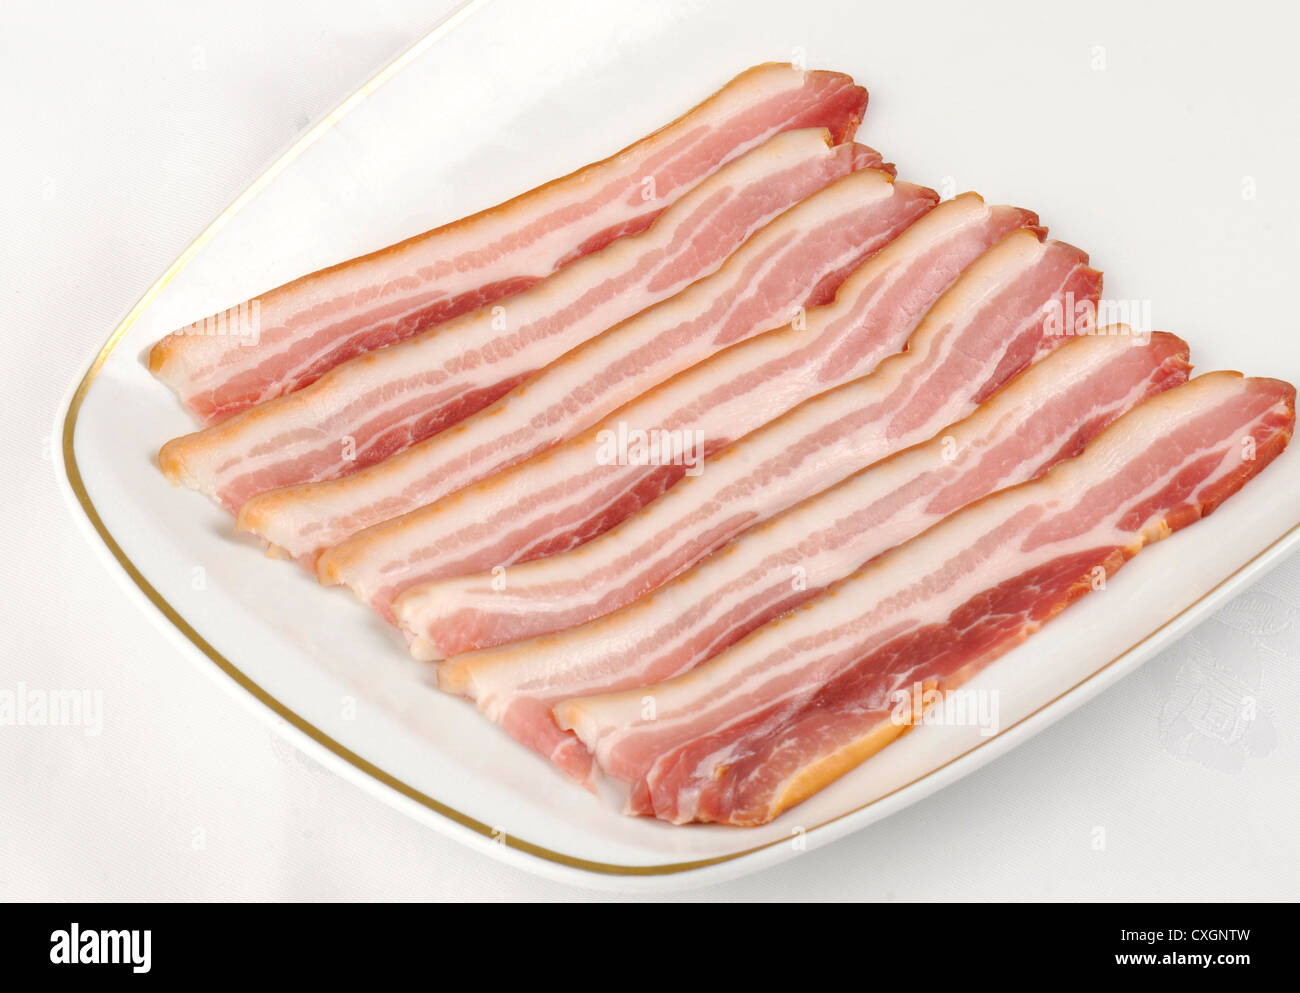 a white plate with strips of uncooked smoked streaky bacon Stock Photo